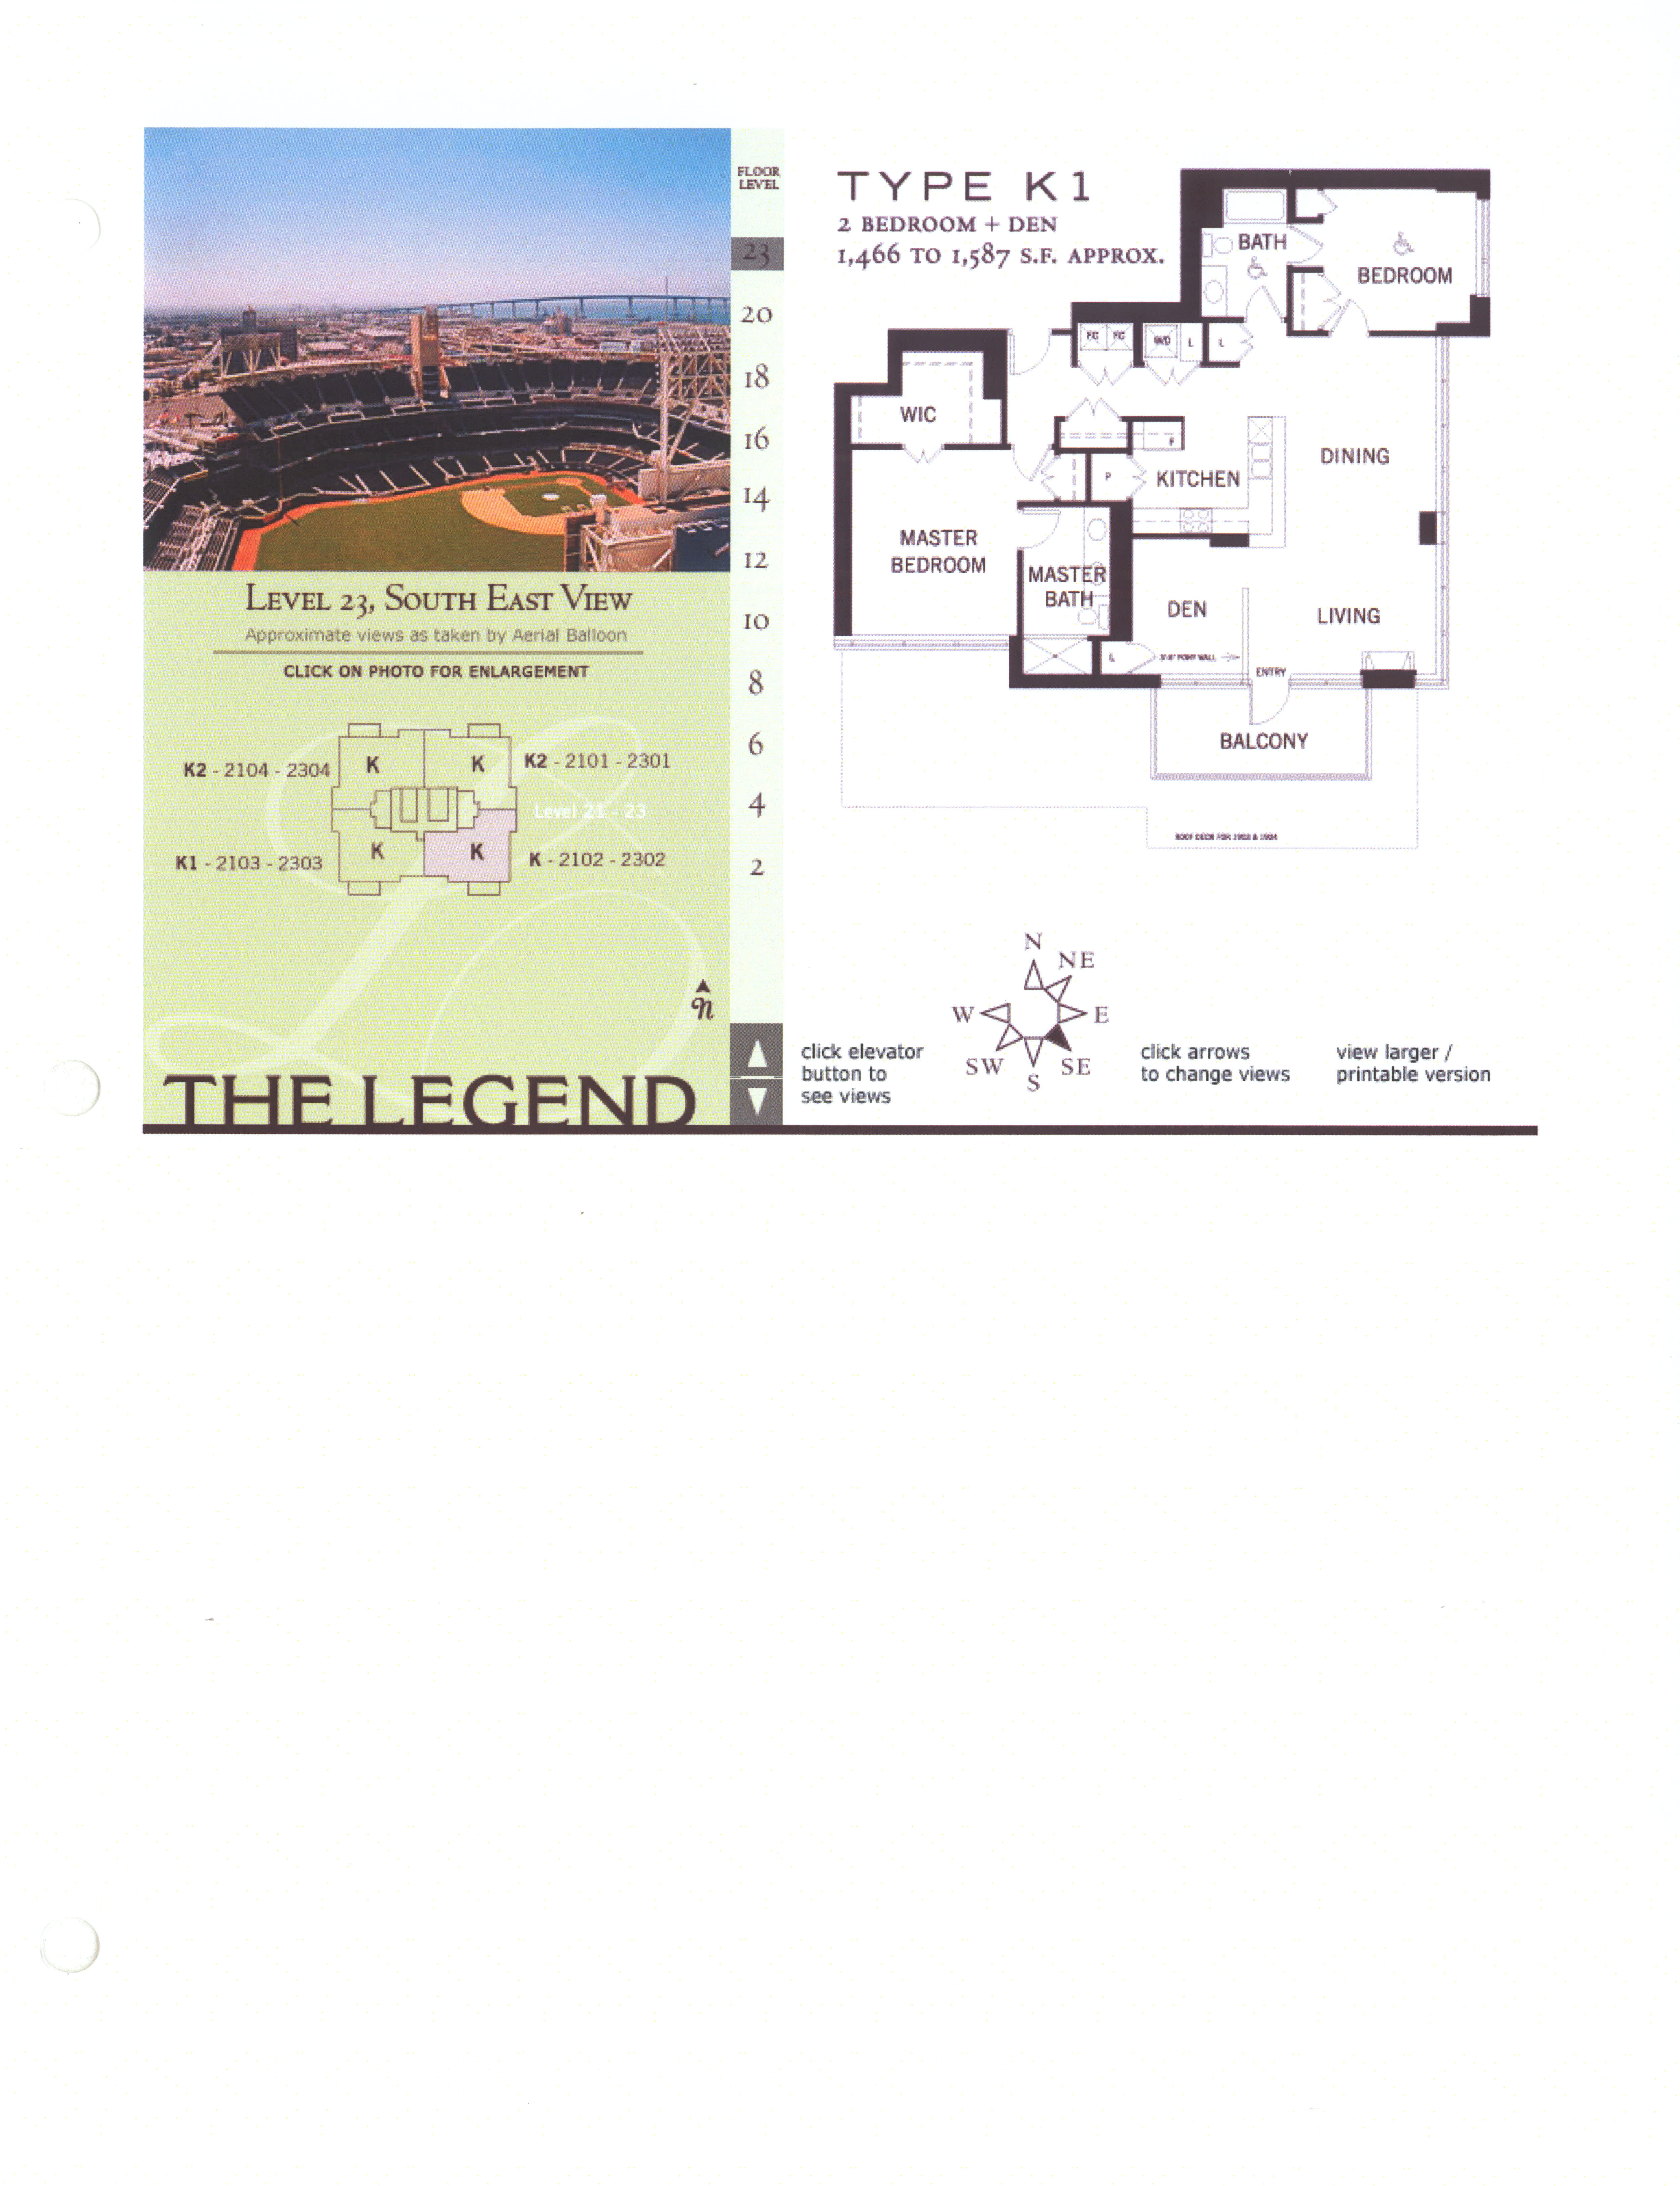 The Legend Floor Plan Level 23, South East View – Type K1